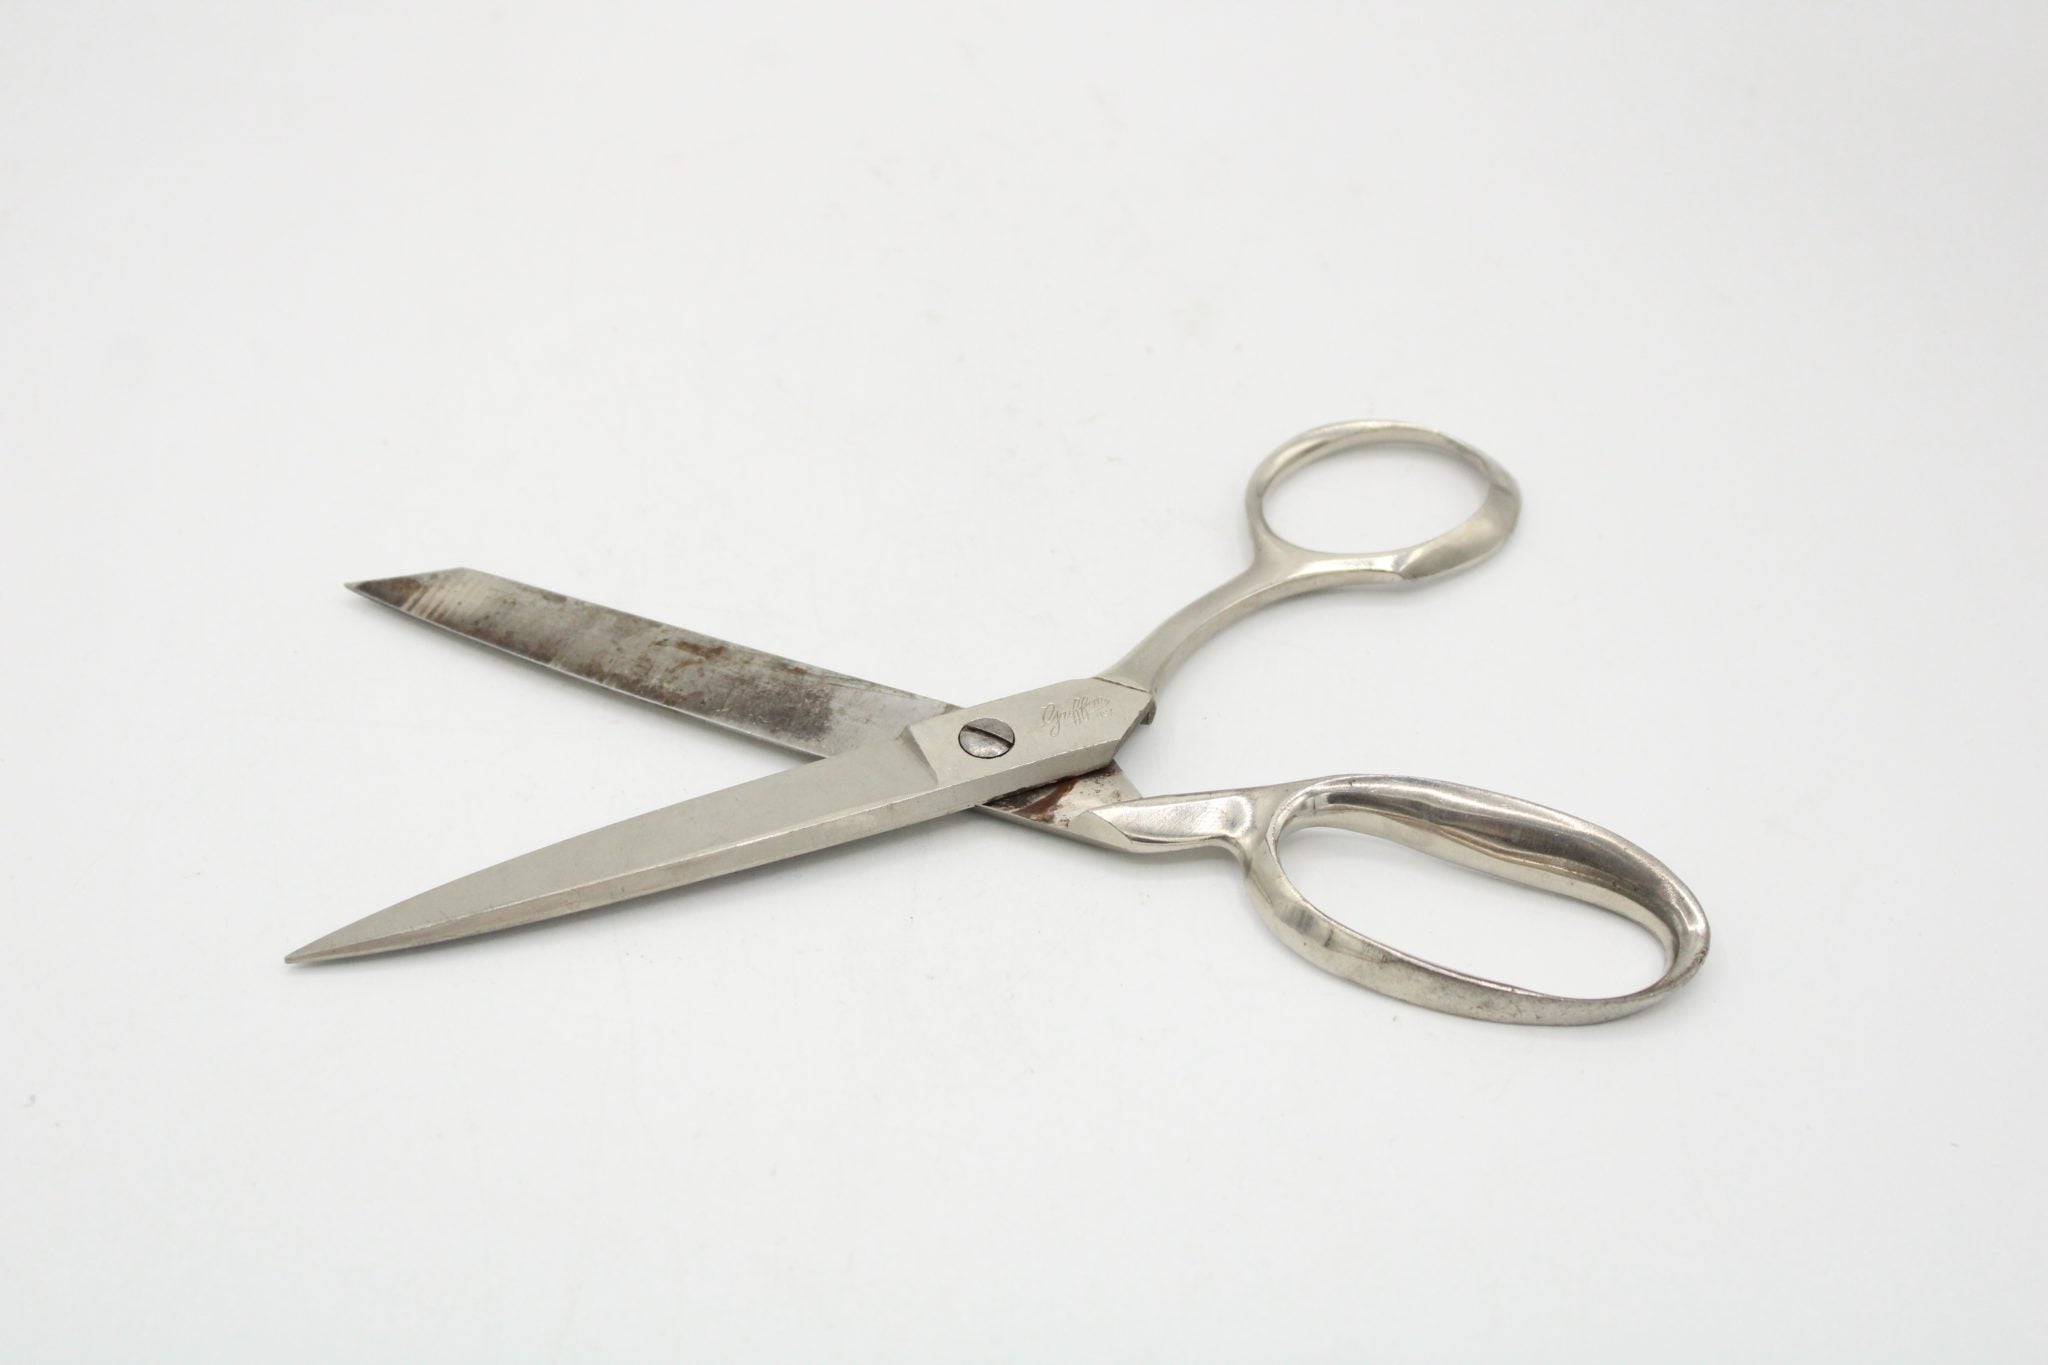 Vintage 4 1/2” Ornate Sewing Scissors Marked Griffon Cutlery Works Germany